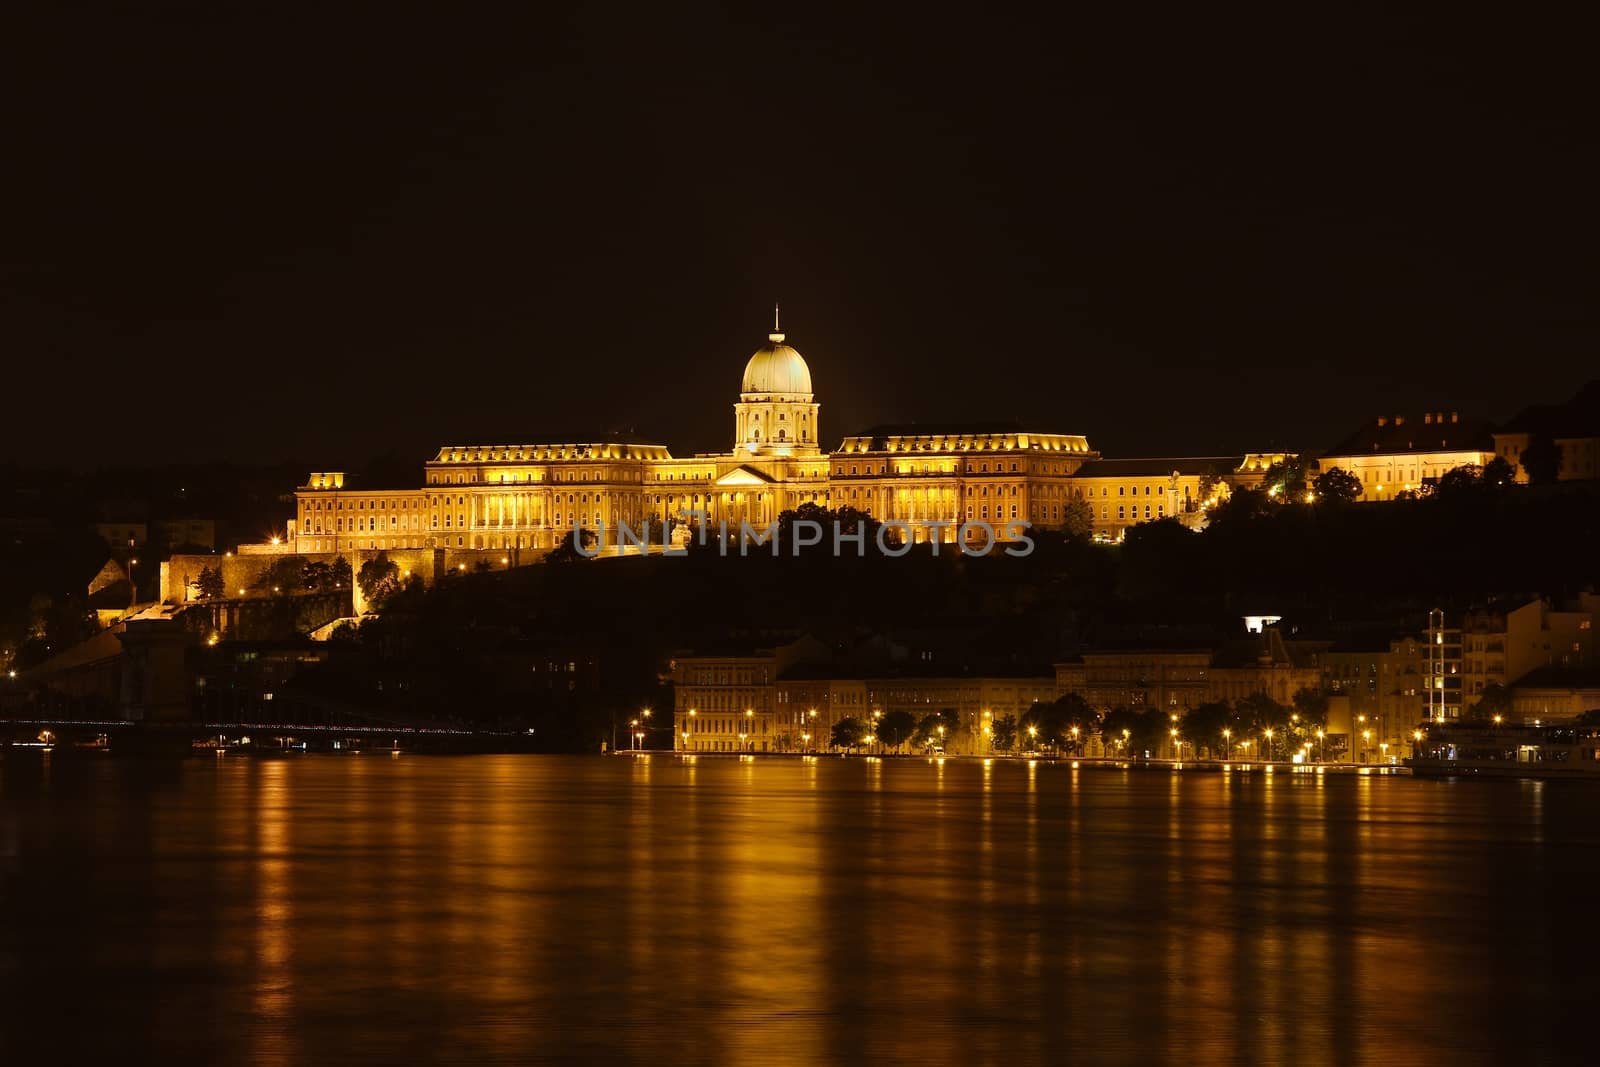 The Castle of Buda in Hungary